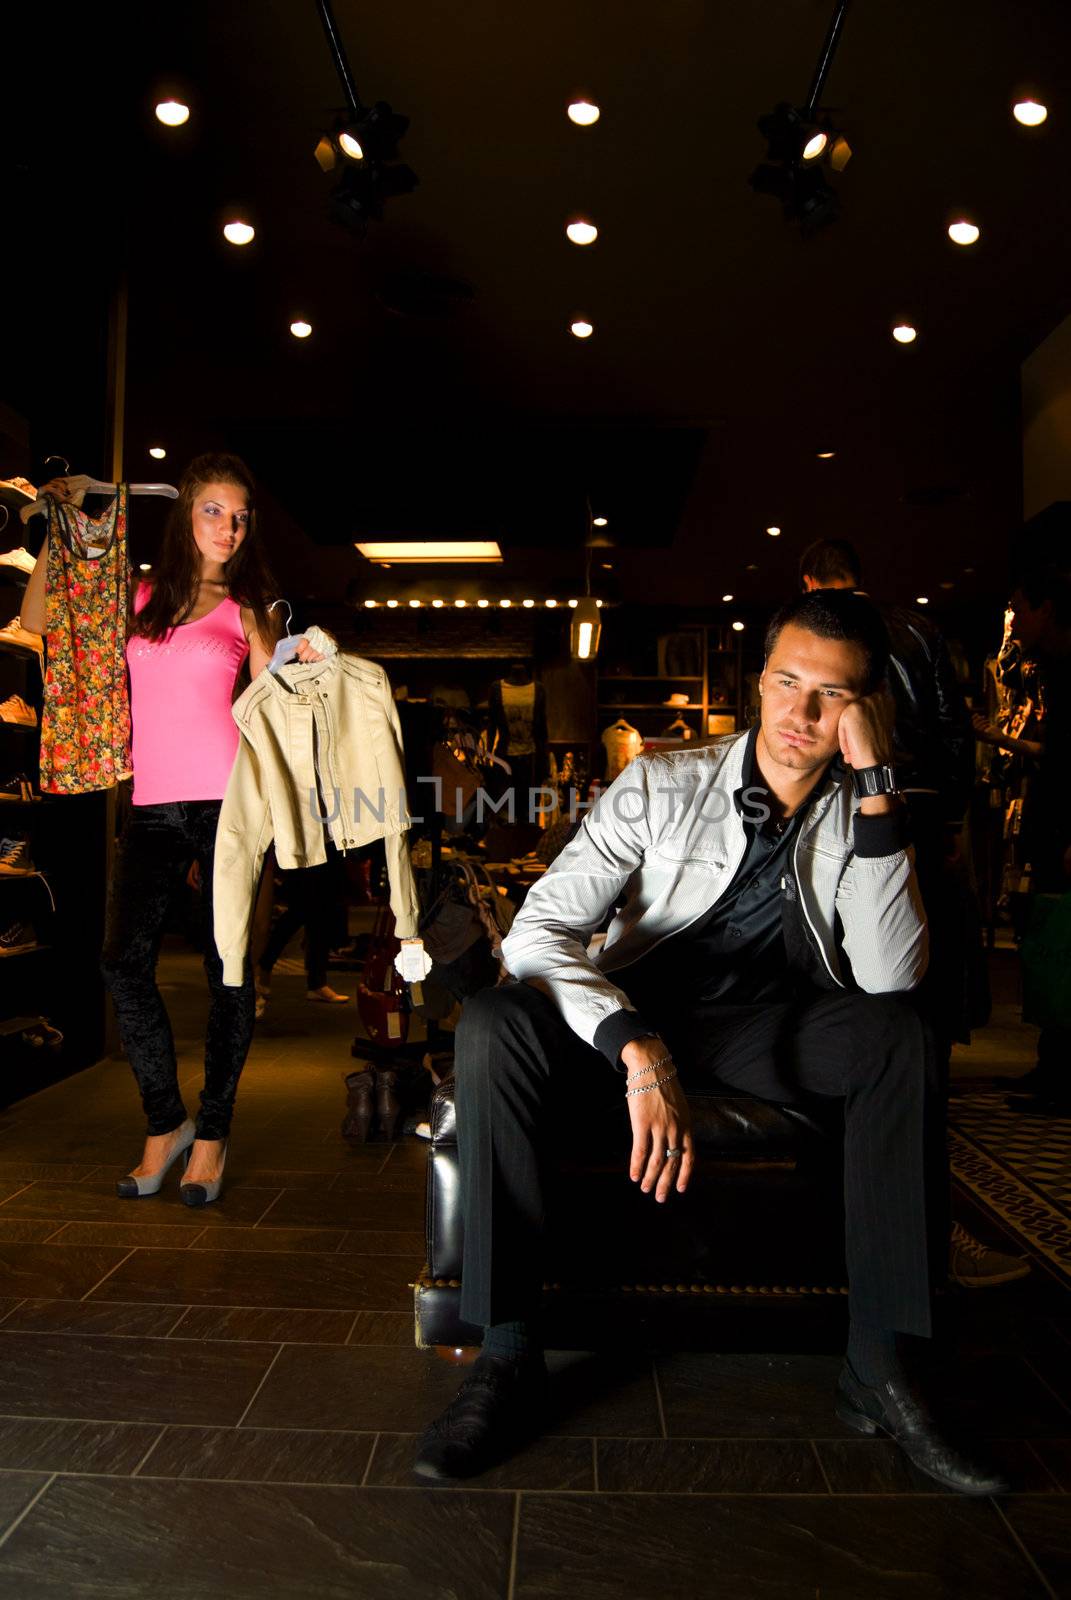 Pair of young adults trying on new clothes in dress storee. The man in fashion suit tired of infinite woman's clothes. His girl friend shows him different variants of wearings.